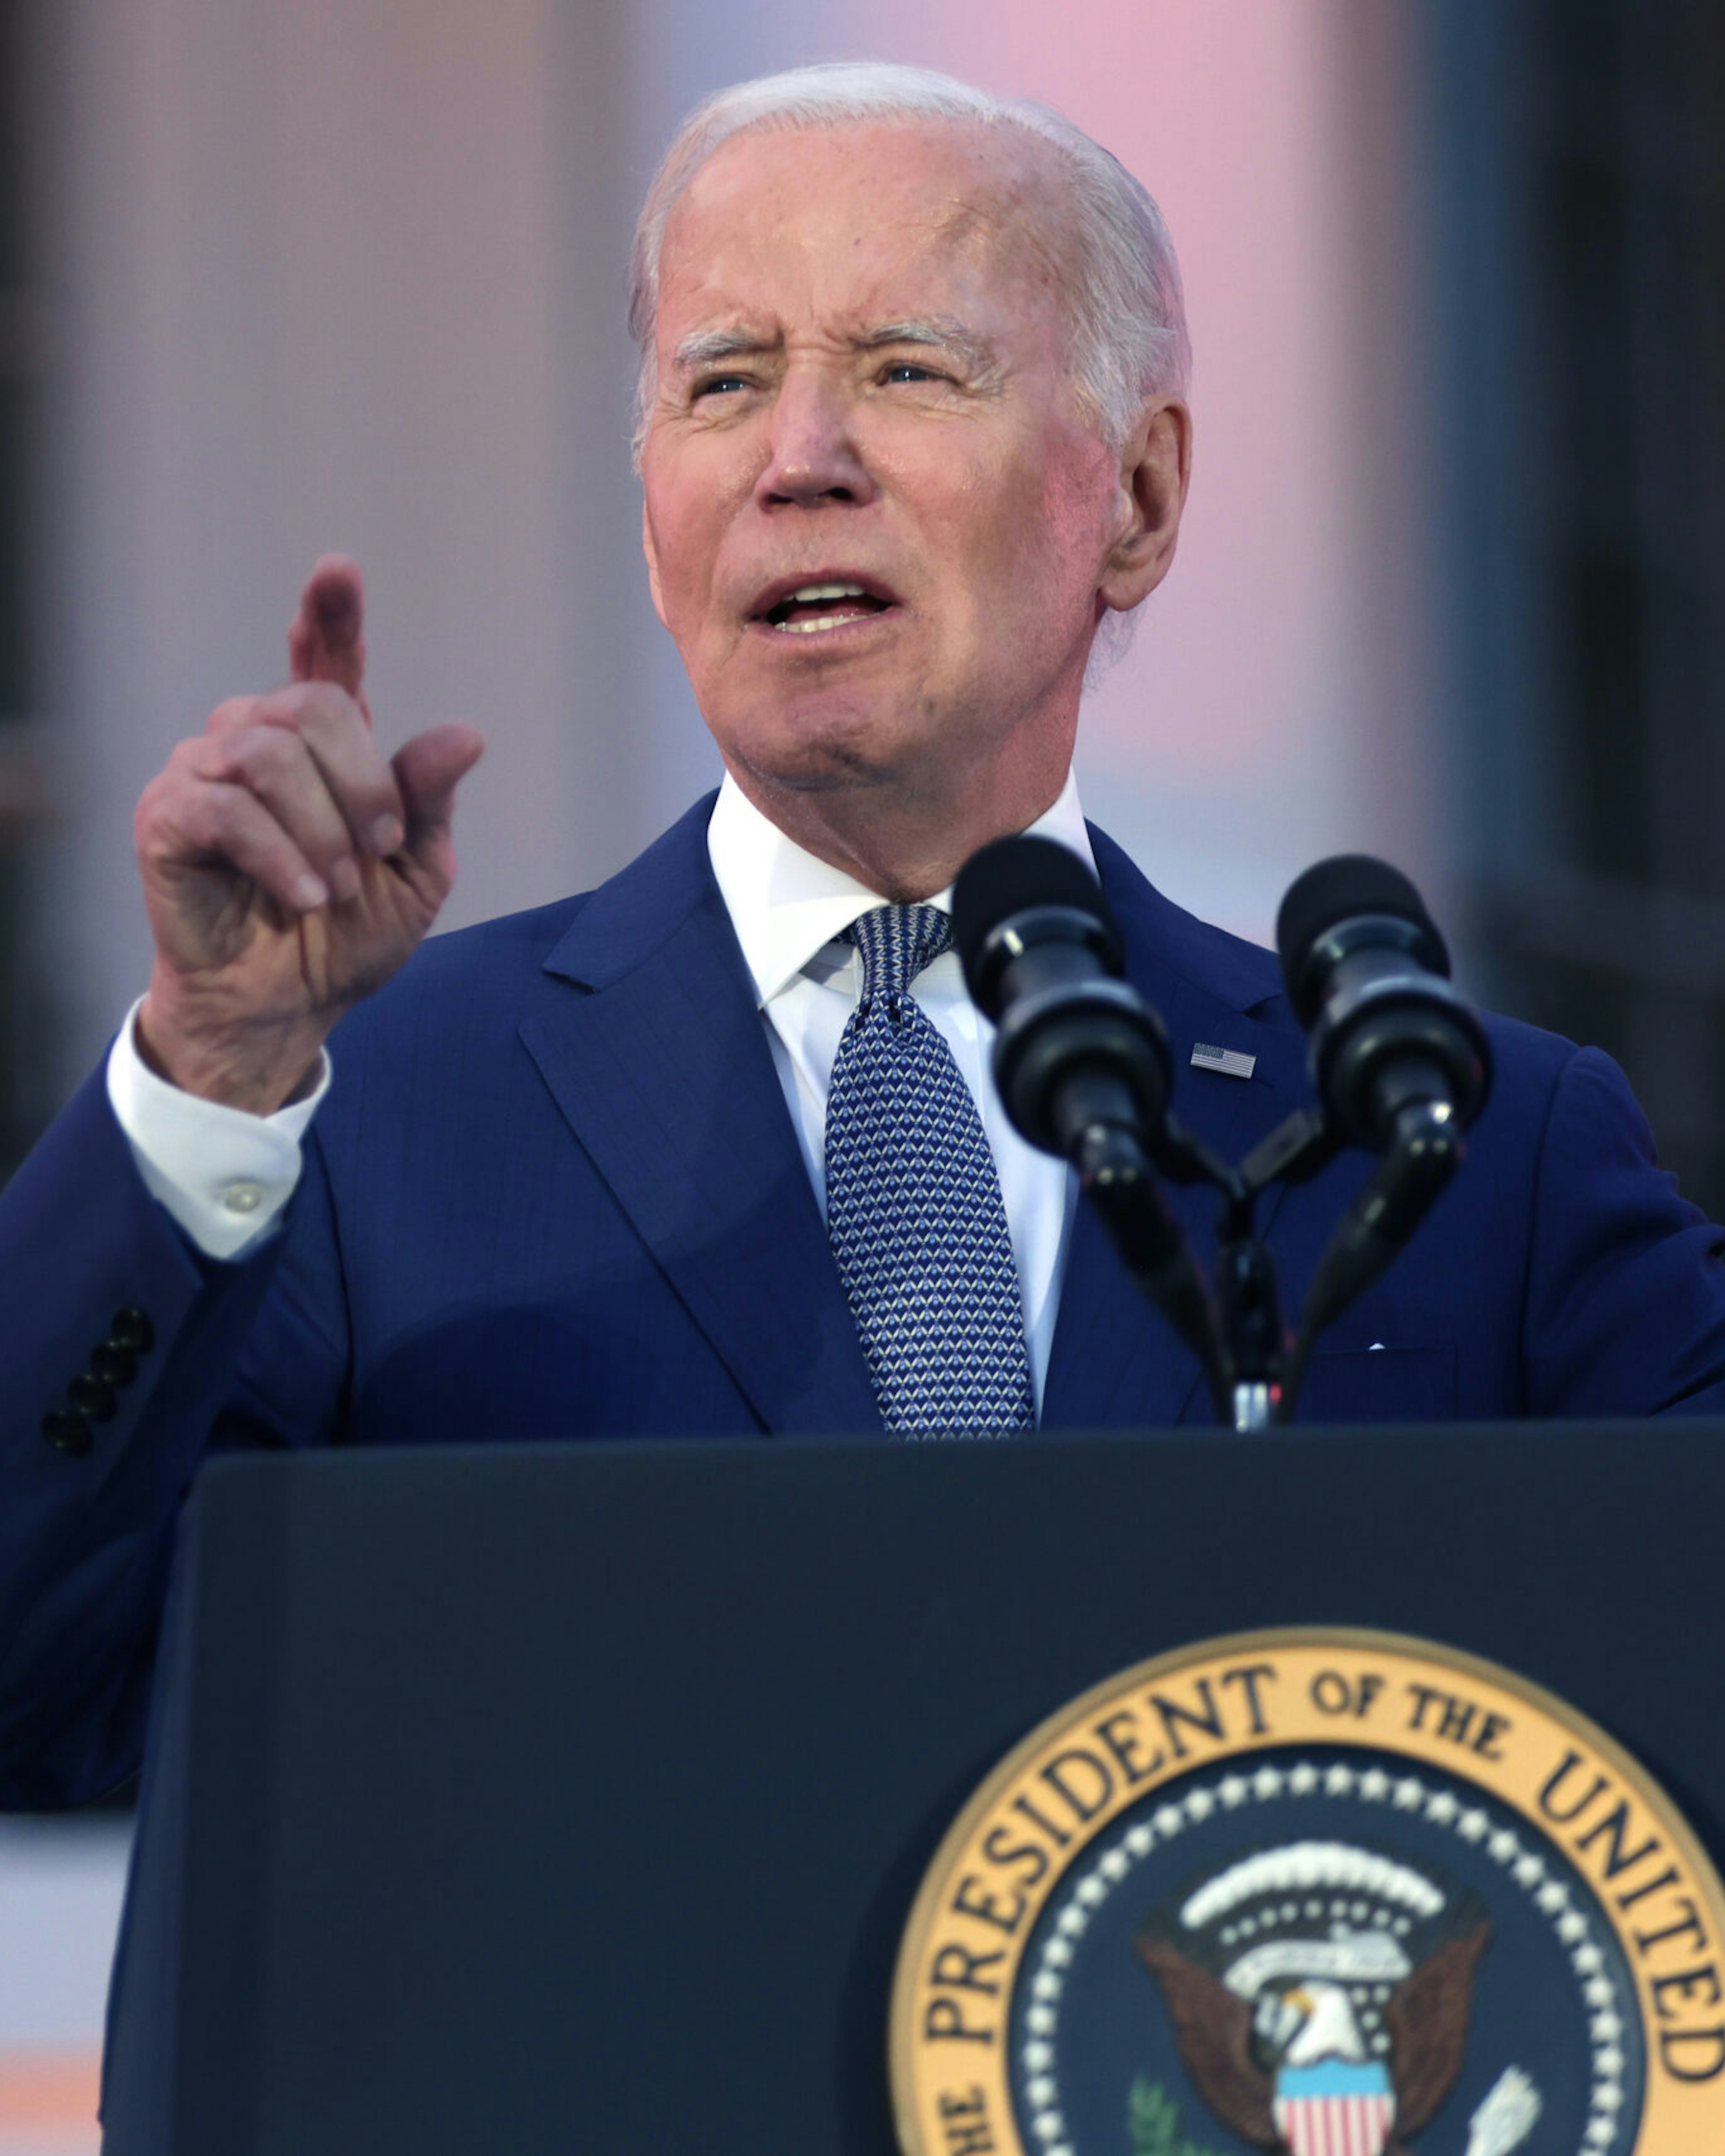 WASHINGTON, DC - JUNE 15: U.S. President Joe Biden speaks during a screening of the film “Flamin’ Hot” on the South Lawn of the White House on June 15, 2023 in Washington, DC. The movie tells the story of Richard Montanez, a janitor at Frito-Lay who claimed to have created the recipe for Flamin’ Hot Cheetos, which turned the snack into a global phenomenon. (Photo by Alex Wong/Getty Images)